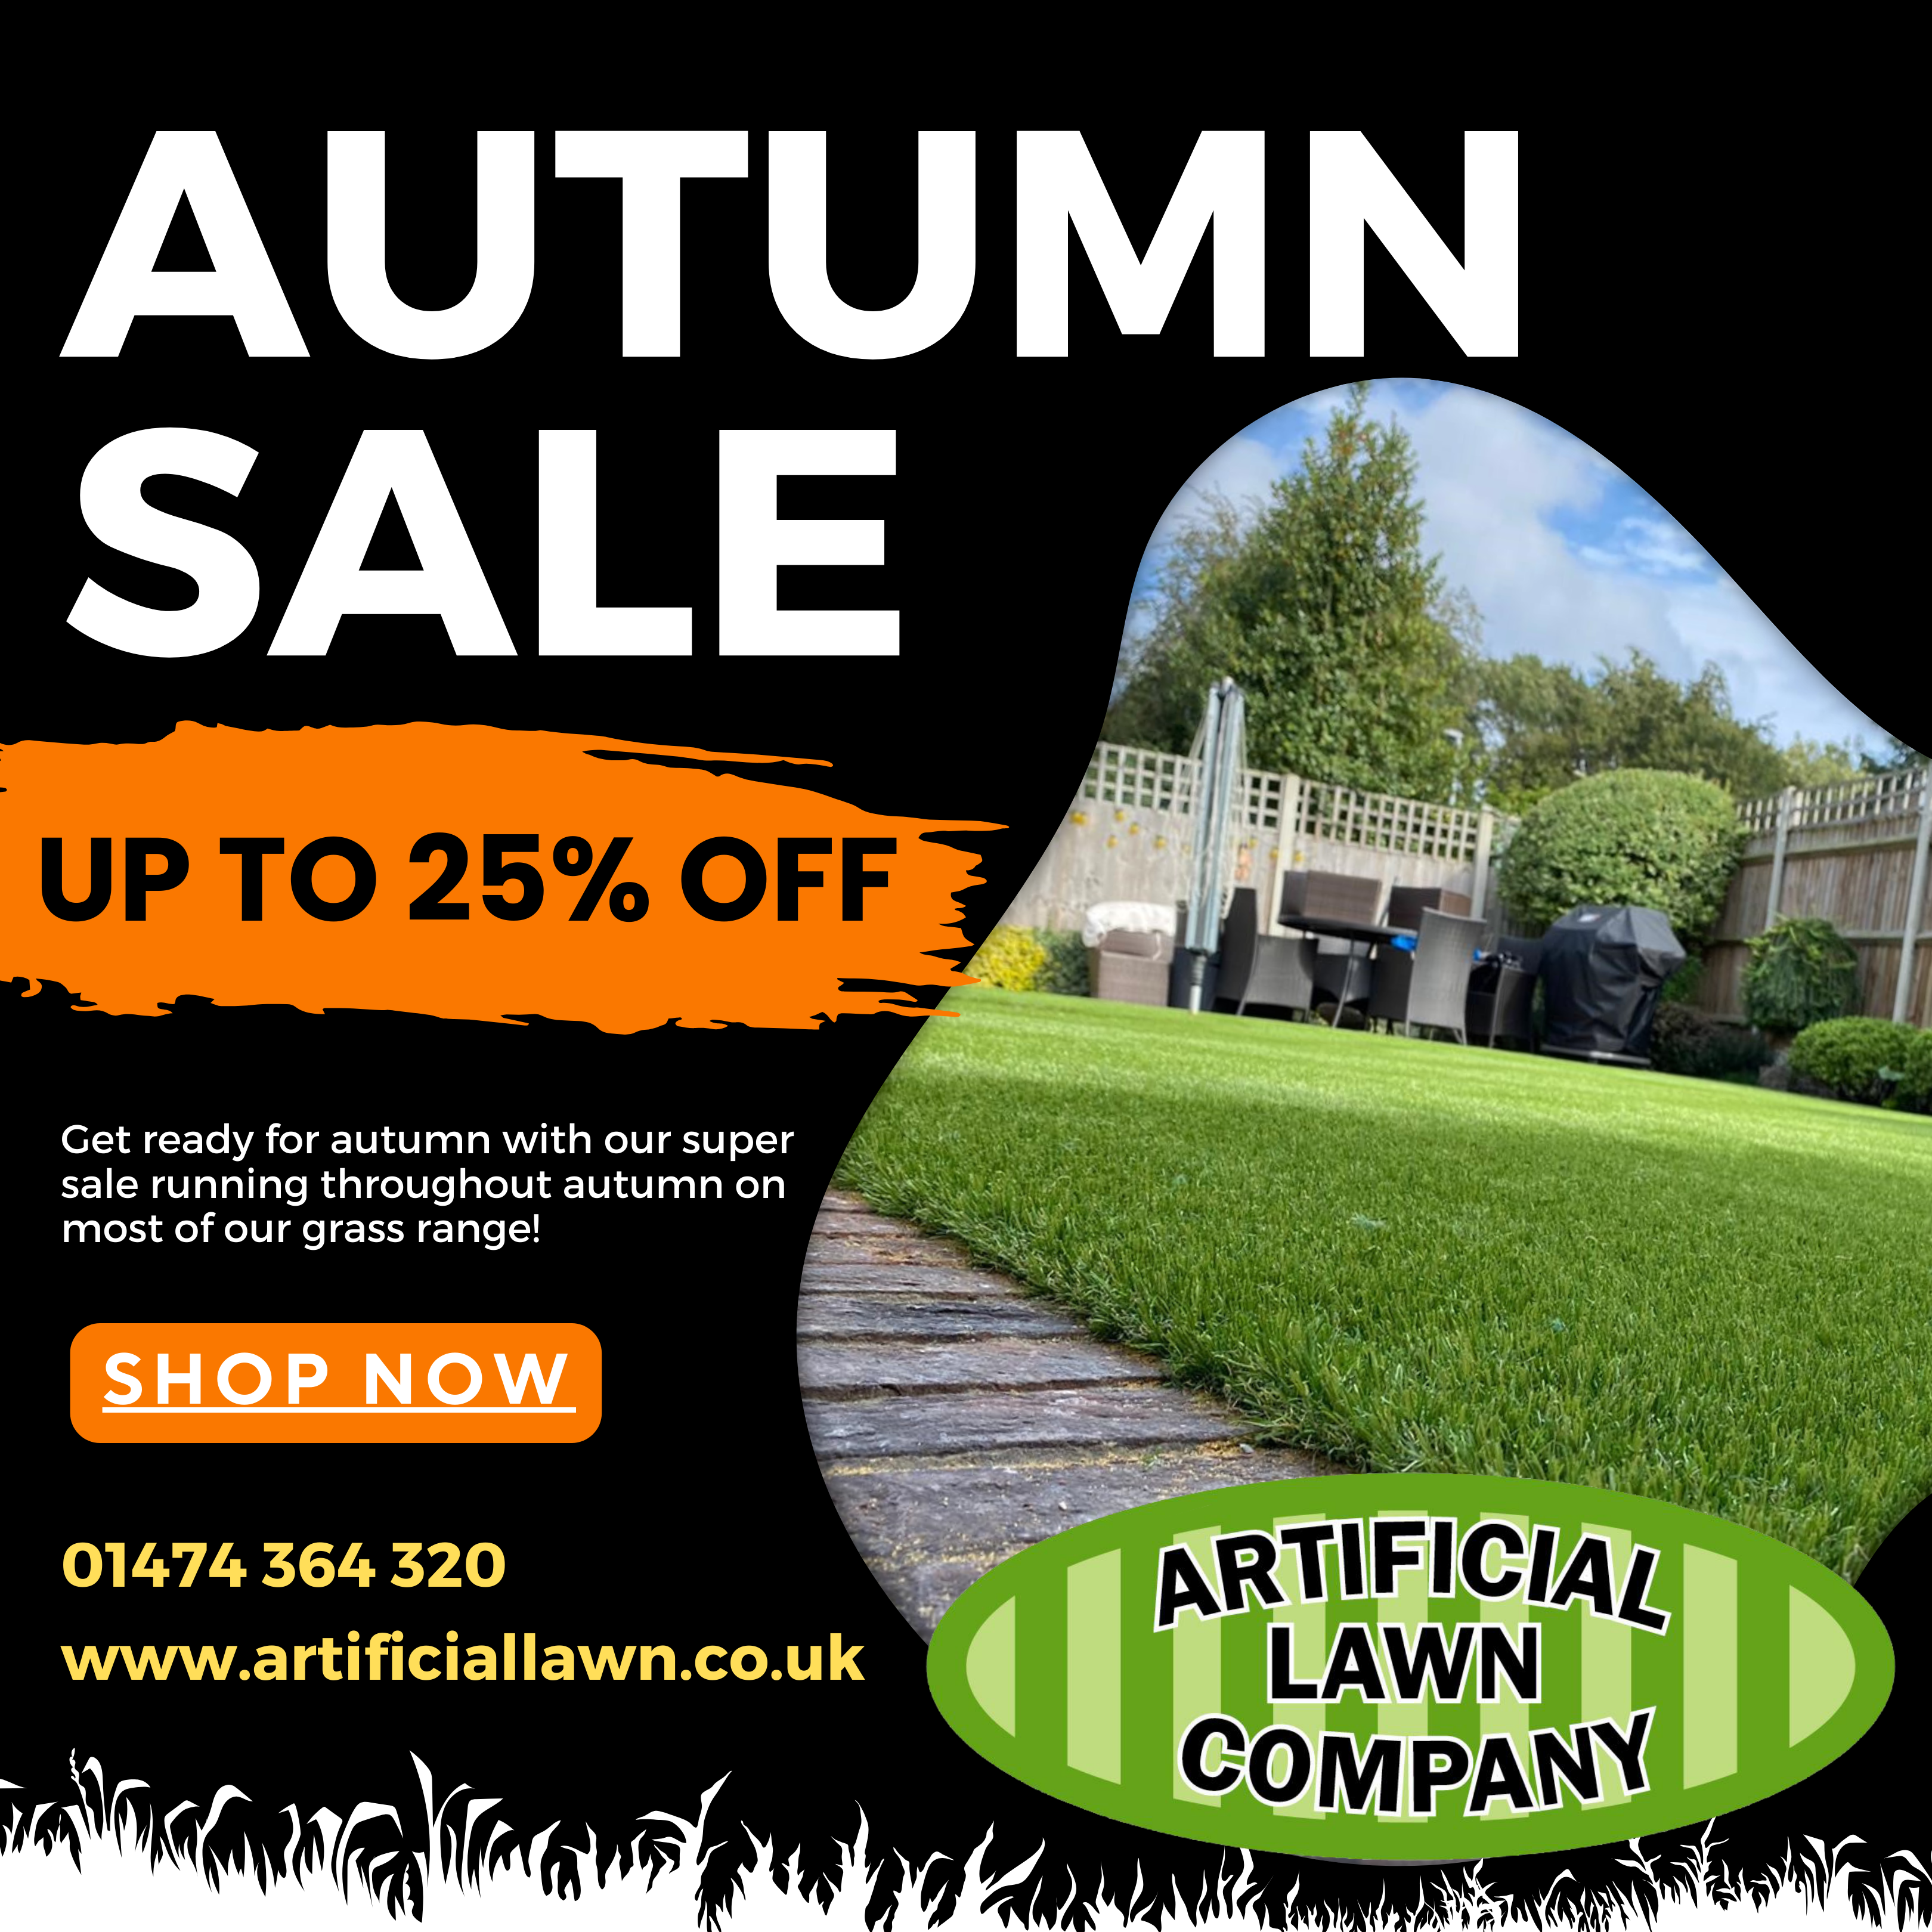 Huge Autumn sale with massive savings on all things artificial grass